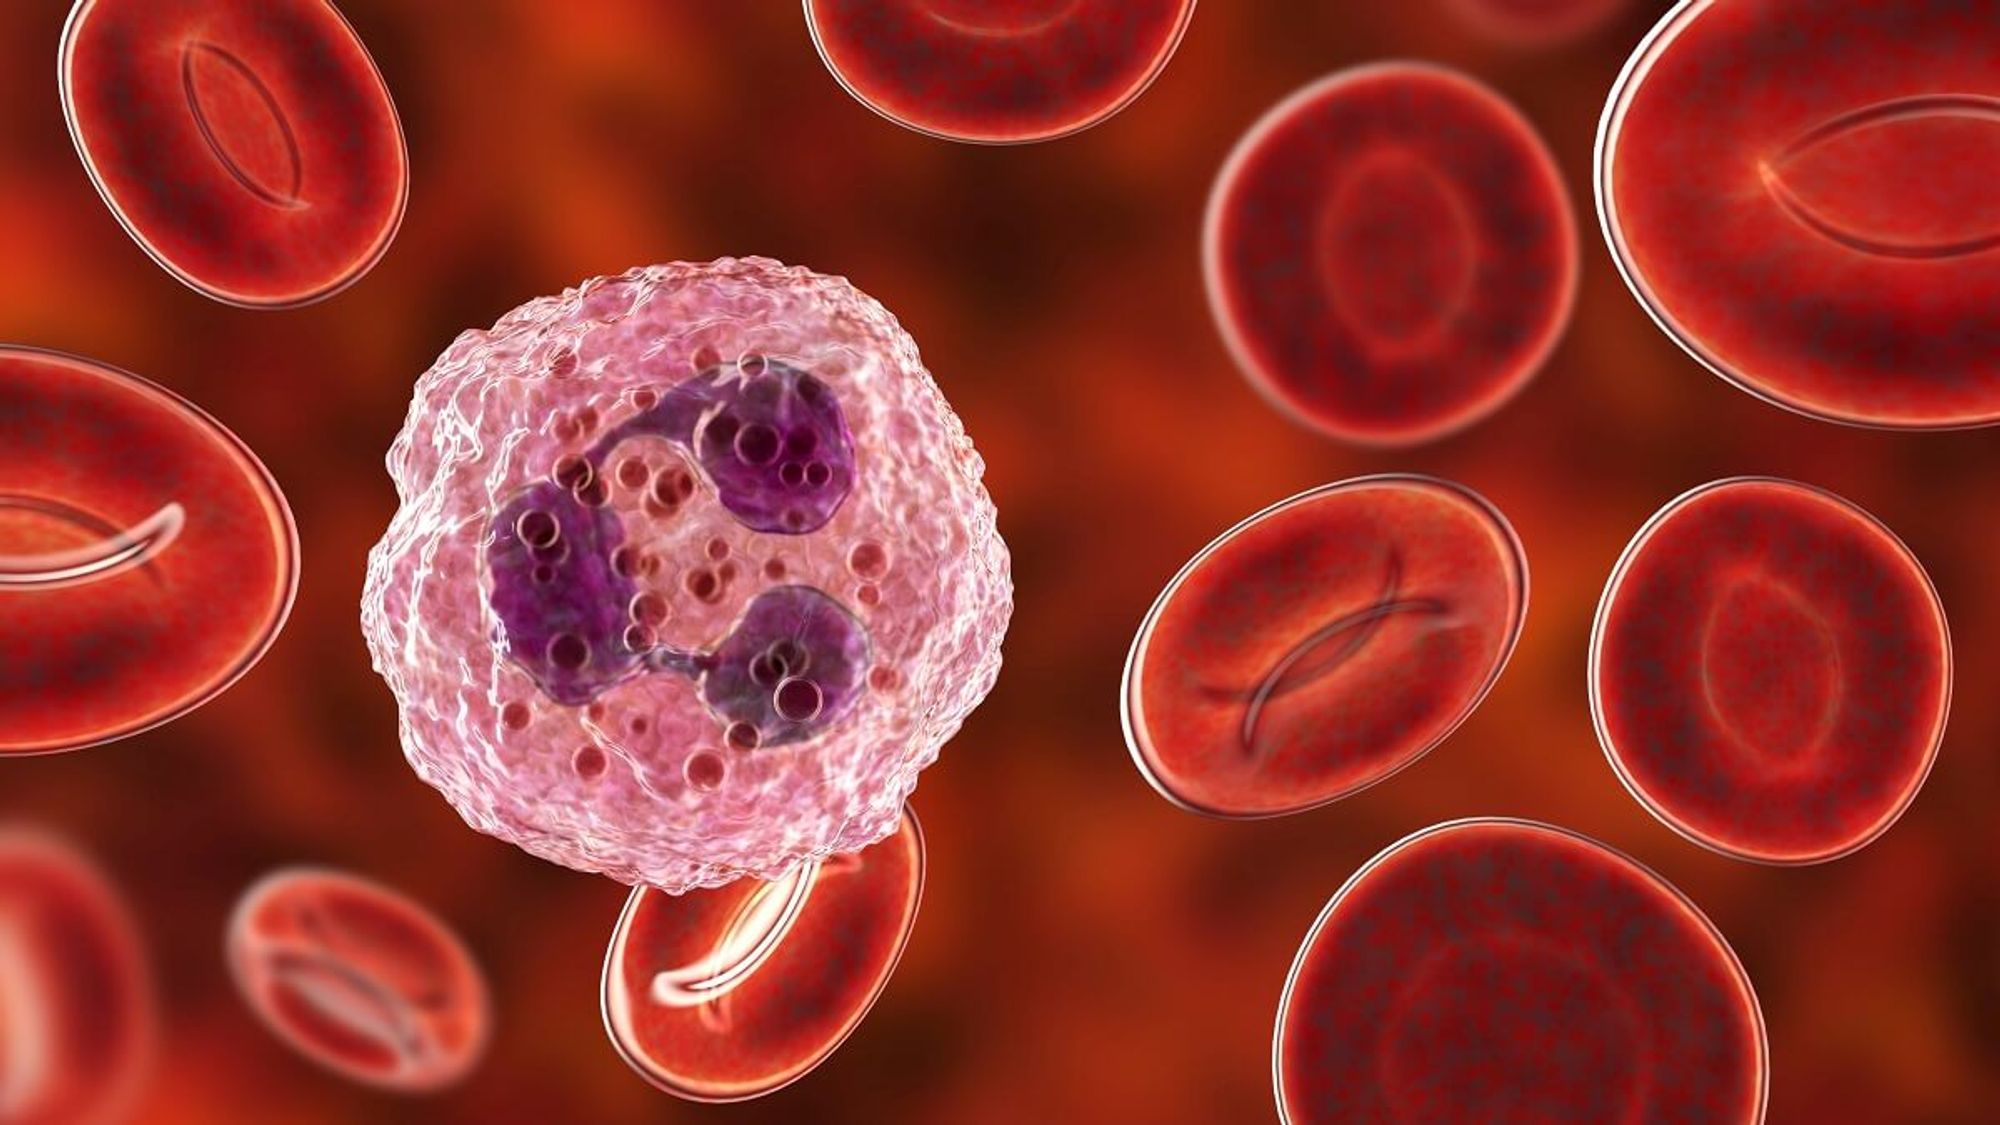 Computer-illustration-of-a-neutrophil-surrounded-by-red-blood-cells.-Credit-KATERYNA-KON-SCIENCE-PHOTO-LIBRARY-Getty-Images-1.jpg